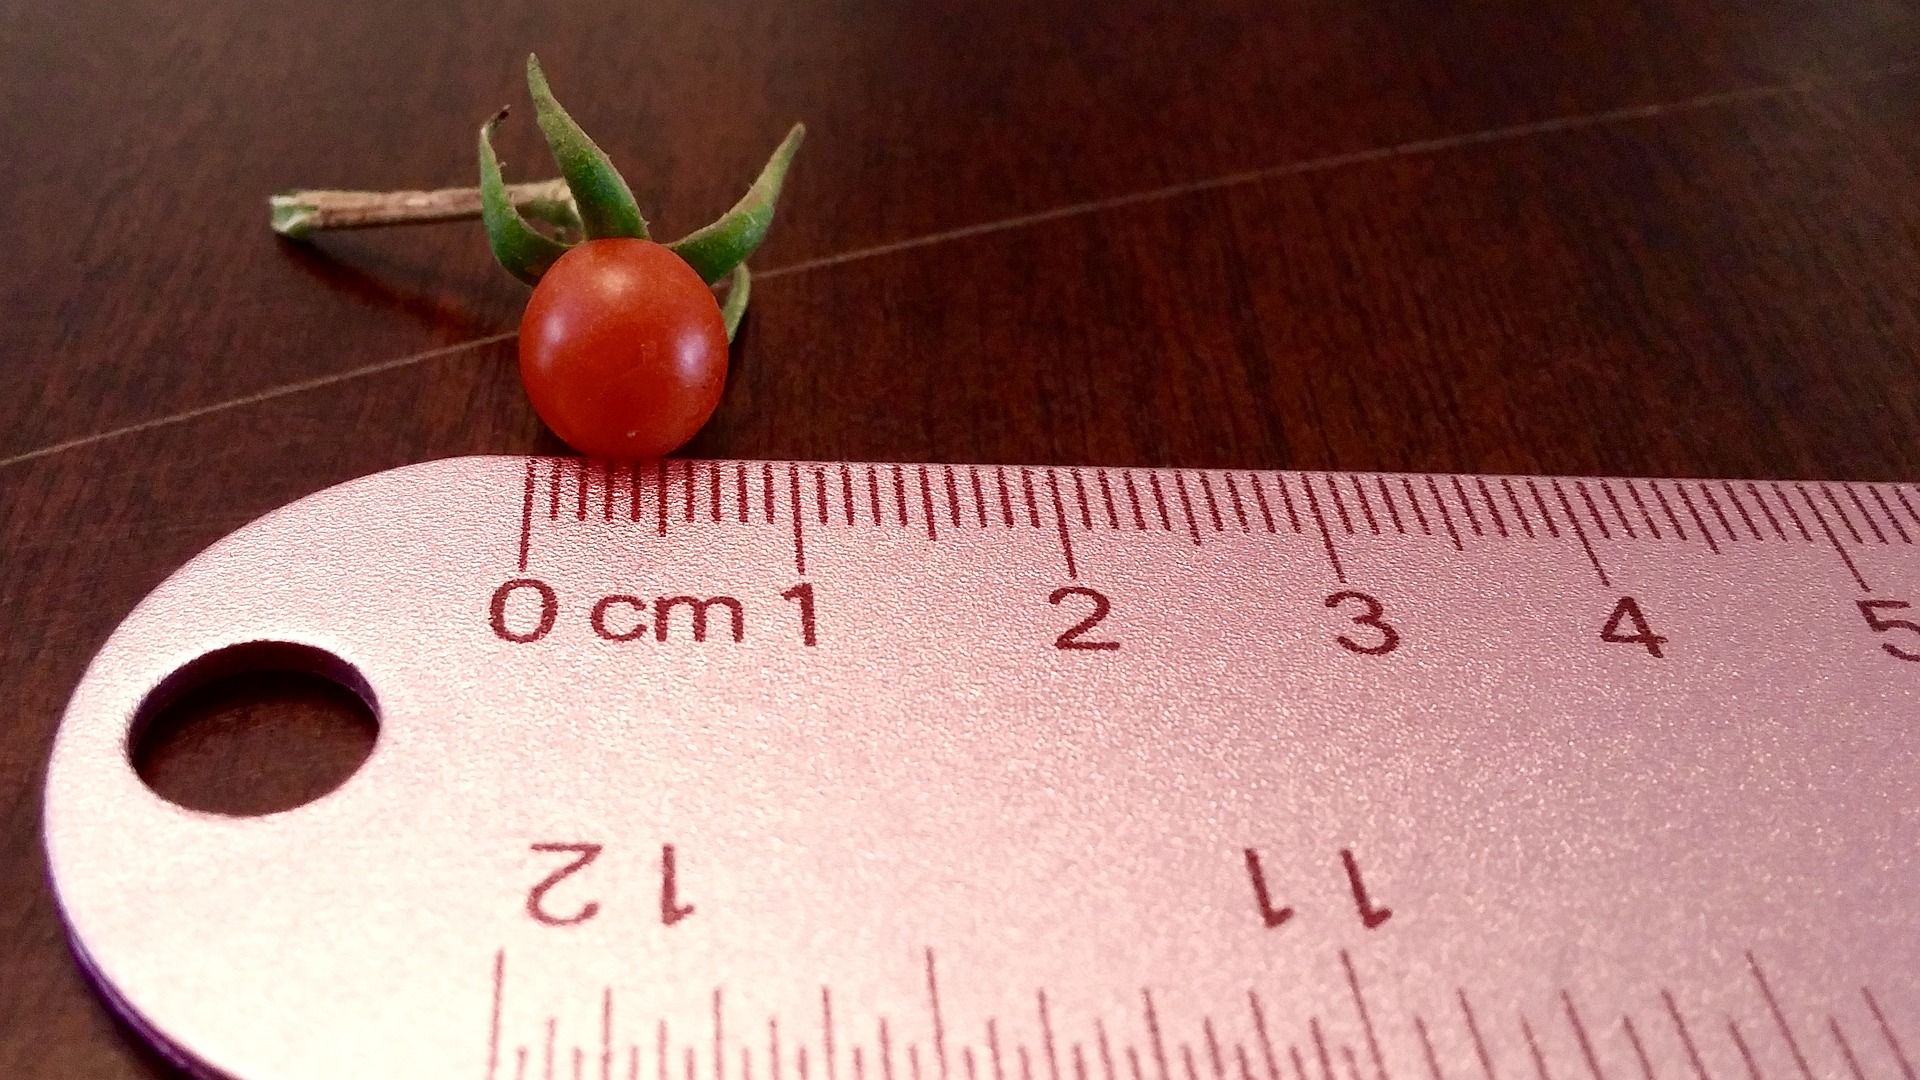 Tomato and a ruler